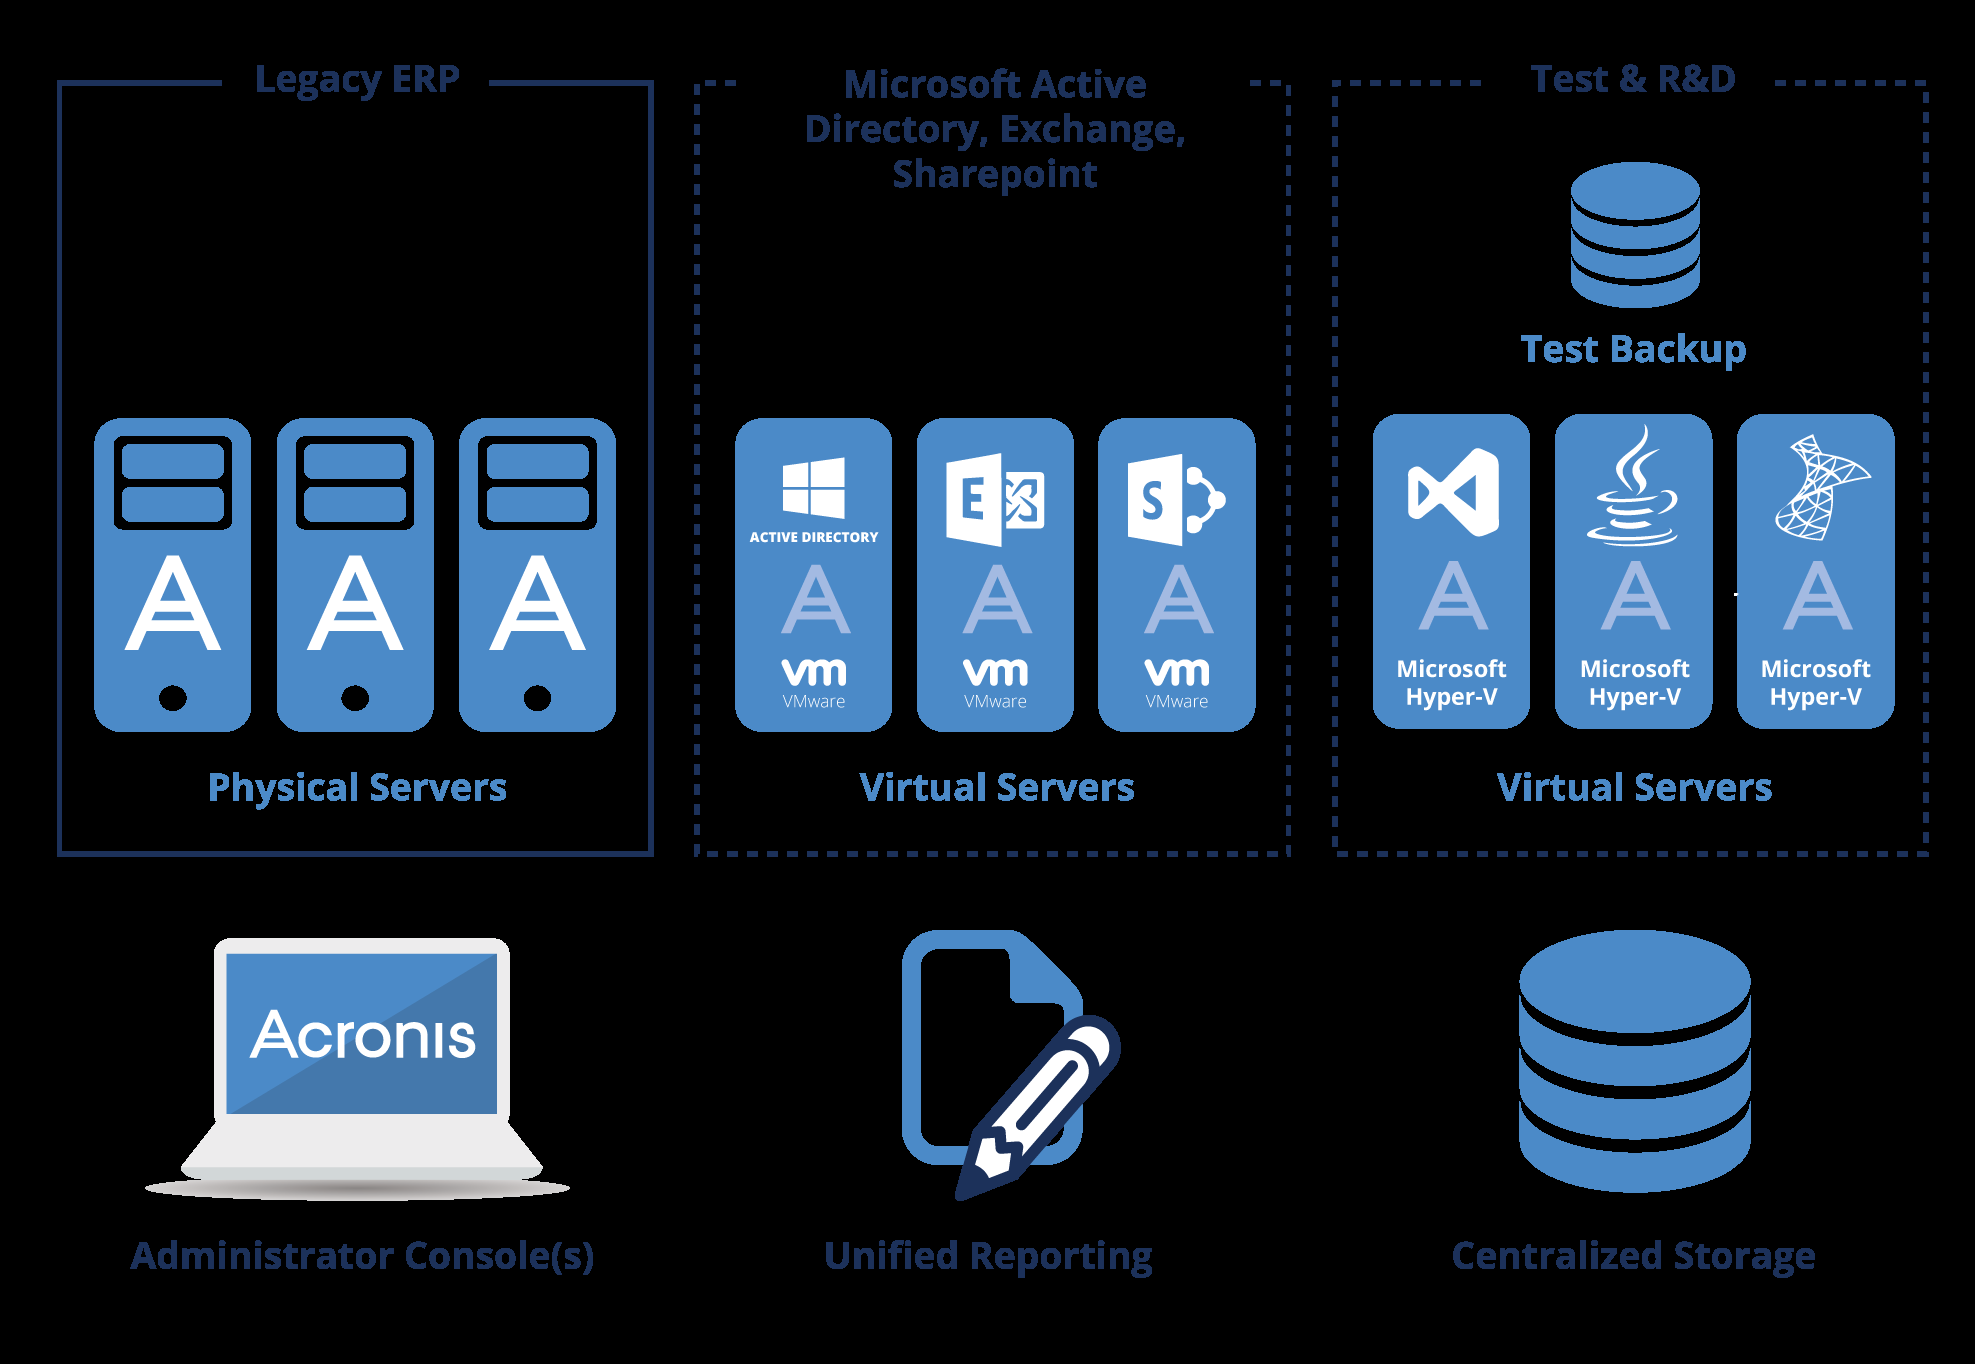 Medium-sized Business Use Case Protecting a Medium-size Hybrid Environment This medium-sized organization runs all key operations using a specialized ERP system, running on a Windows server, which